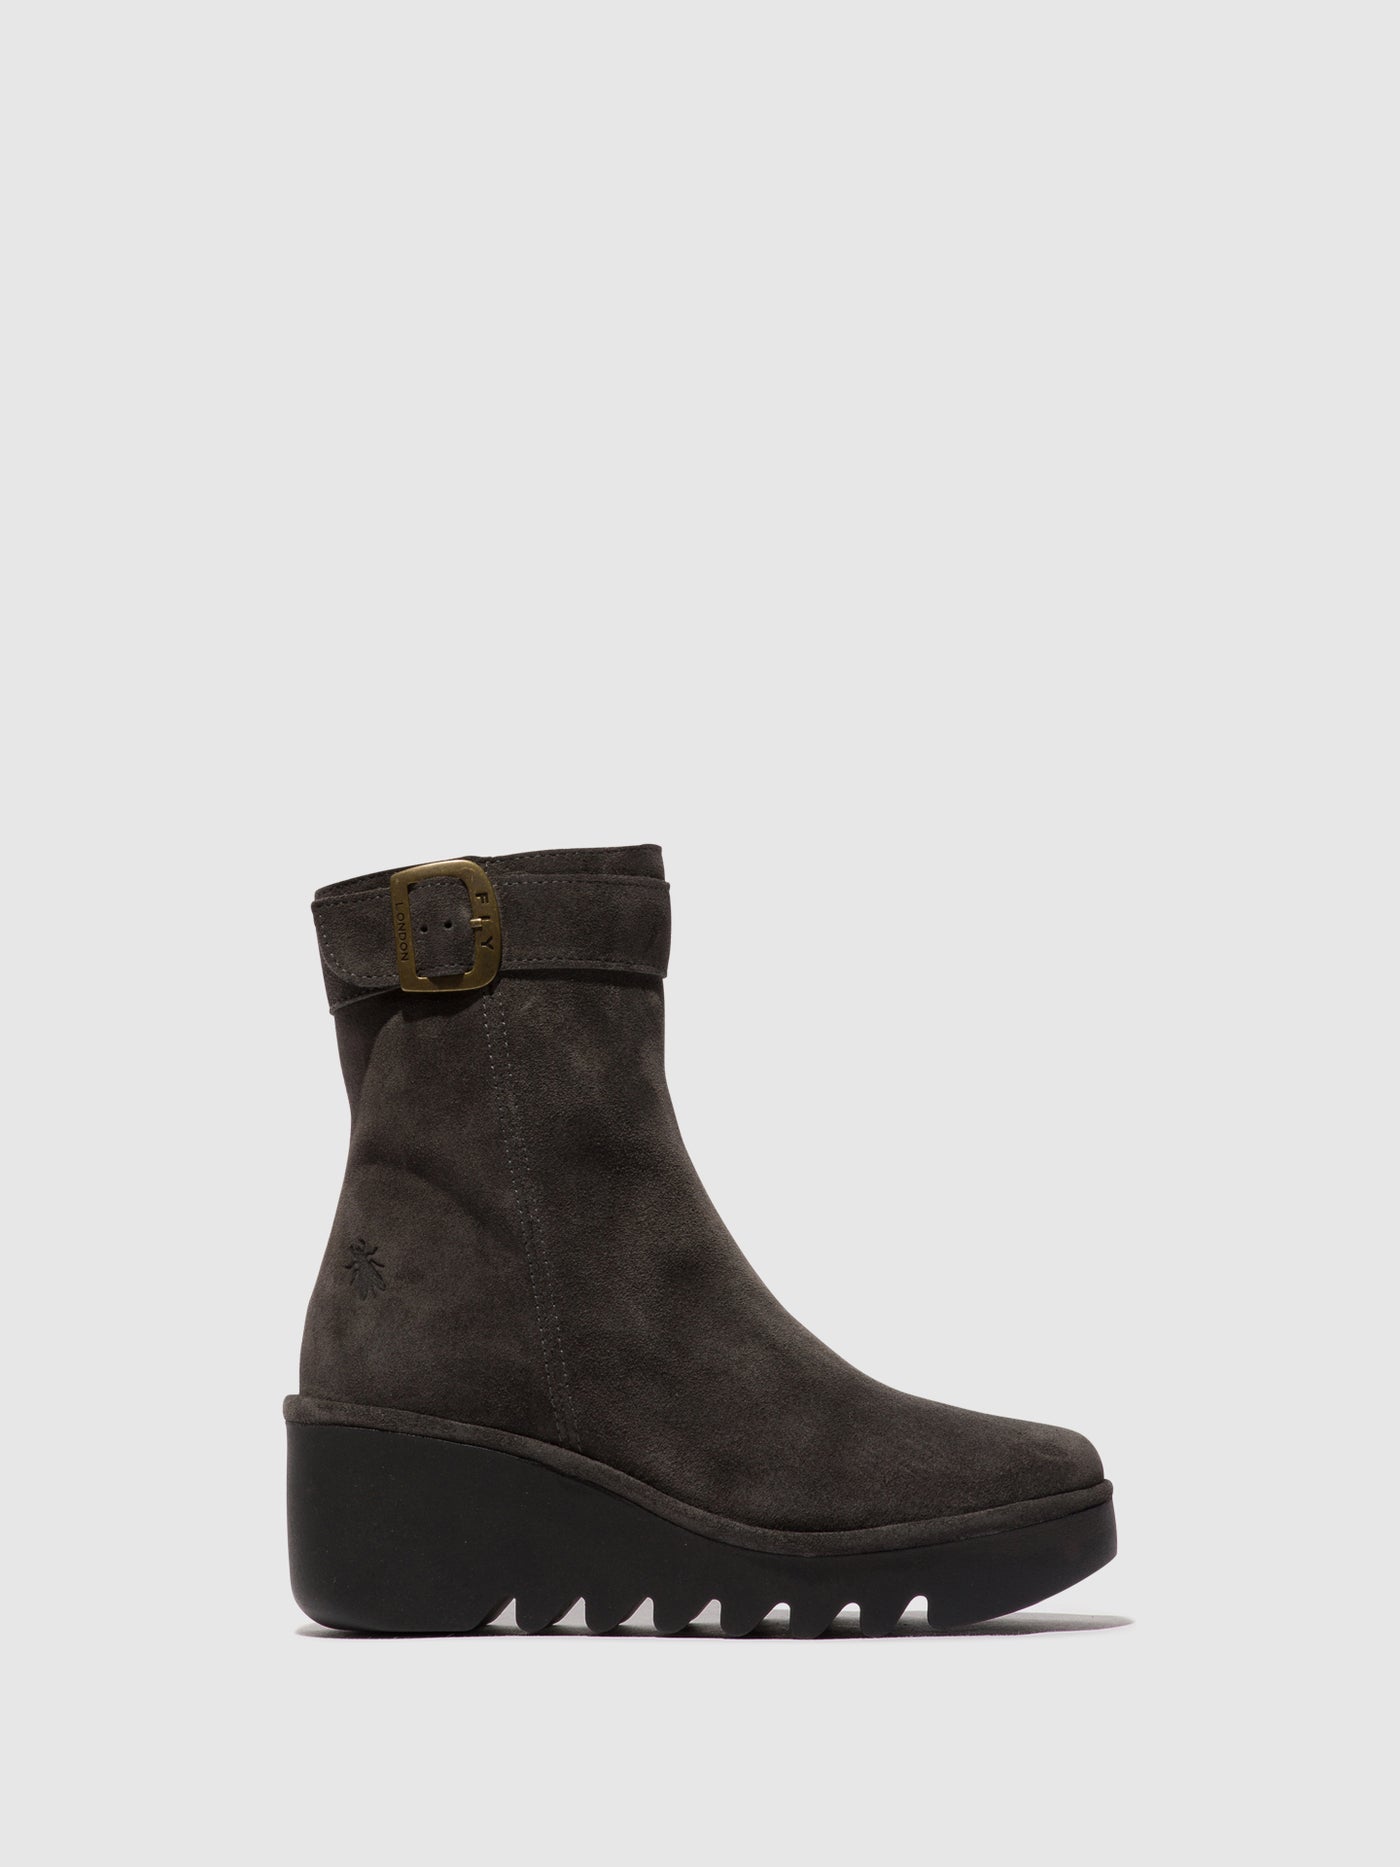 Zip Up Ankle Boots BEPP396FLY DIESEL